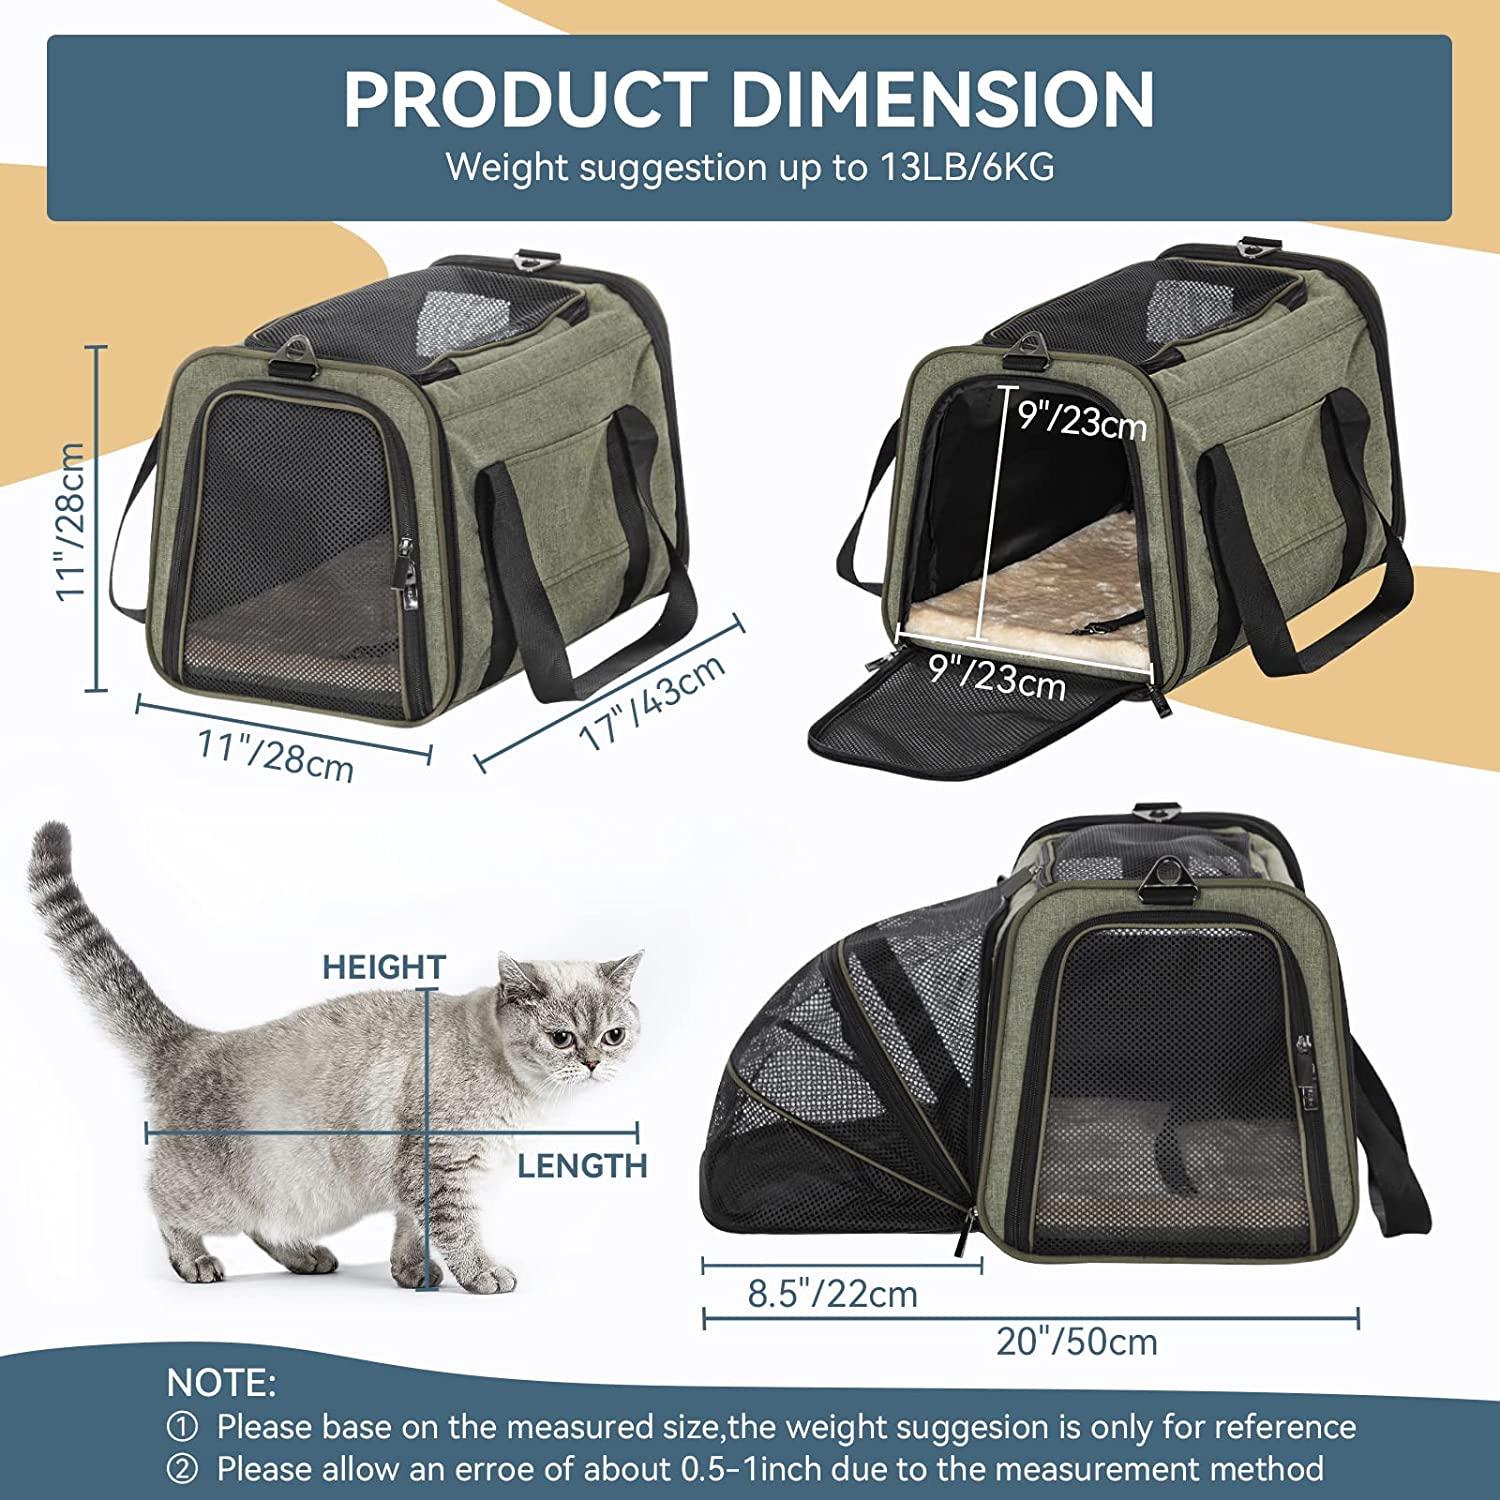 Petsfit Expandable Cat Carrier Dog Carrier,Airline Approved Soft-Sided  Portable Pet Travel Washable Carrier for Kittens,Puppies M:17x11x11 Green